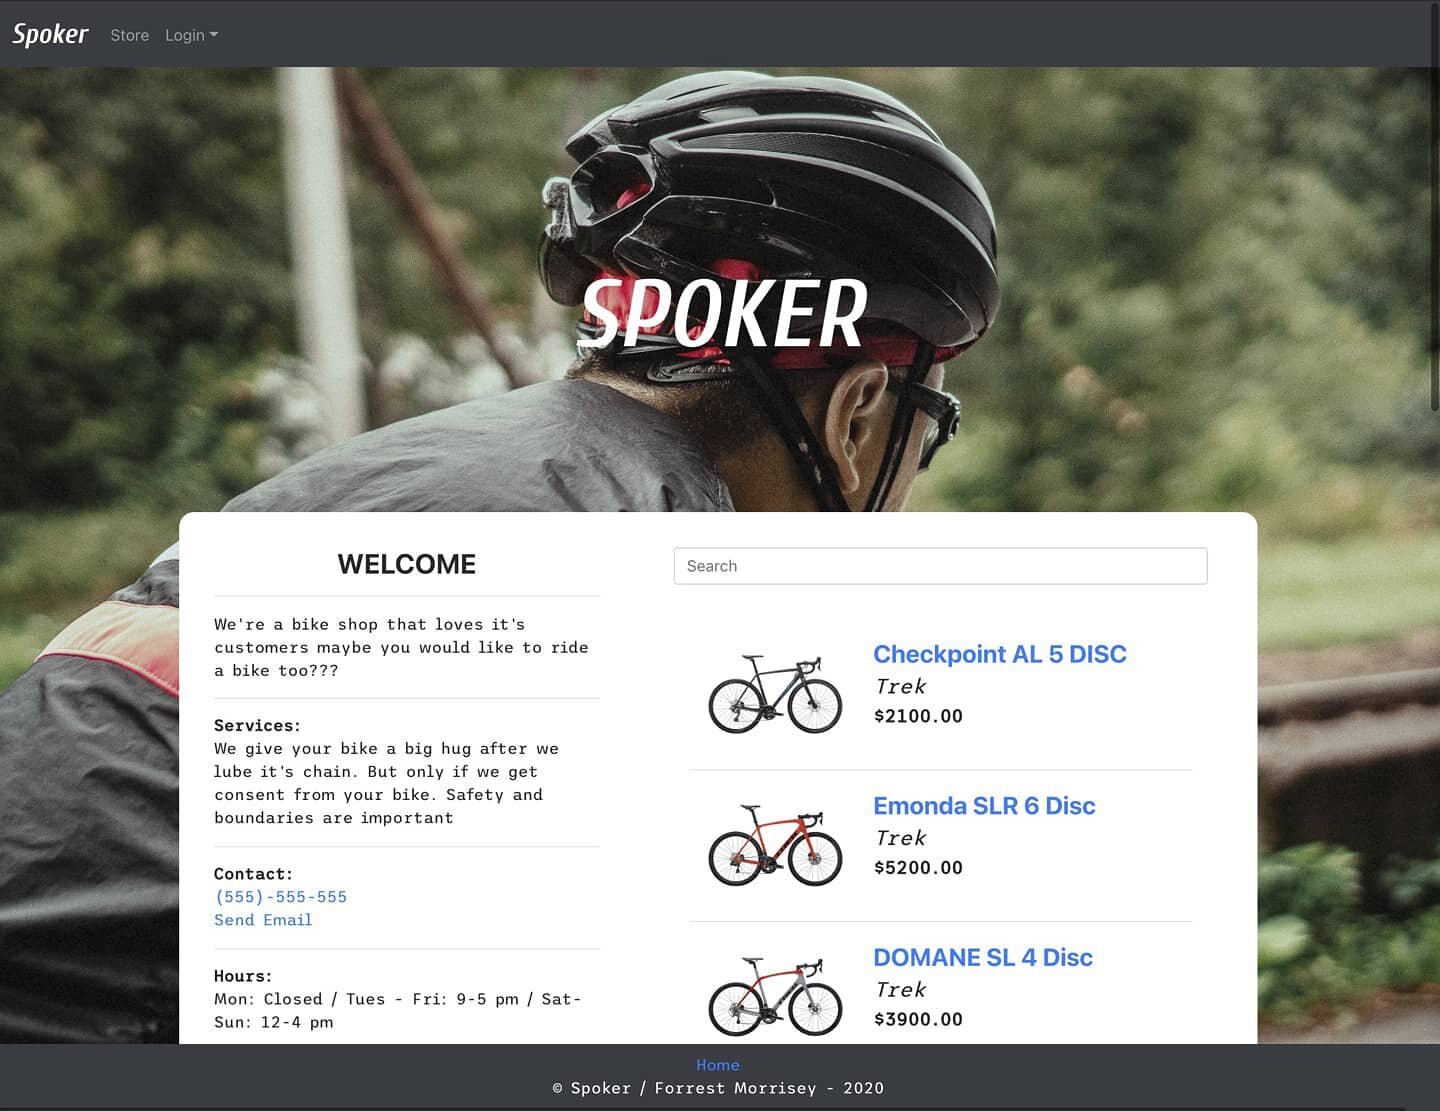 Project Spoker is a fully functional MERN Stack e-commerce Application designed for bike shops. Allowing multiple user sign-in authentication, and shop owner functionality to mange shop inventory, sales, and orders.

Technology used: MongoDb, Mongoos